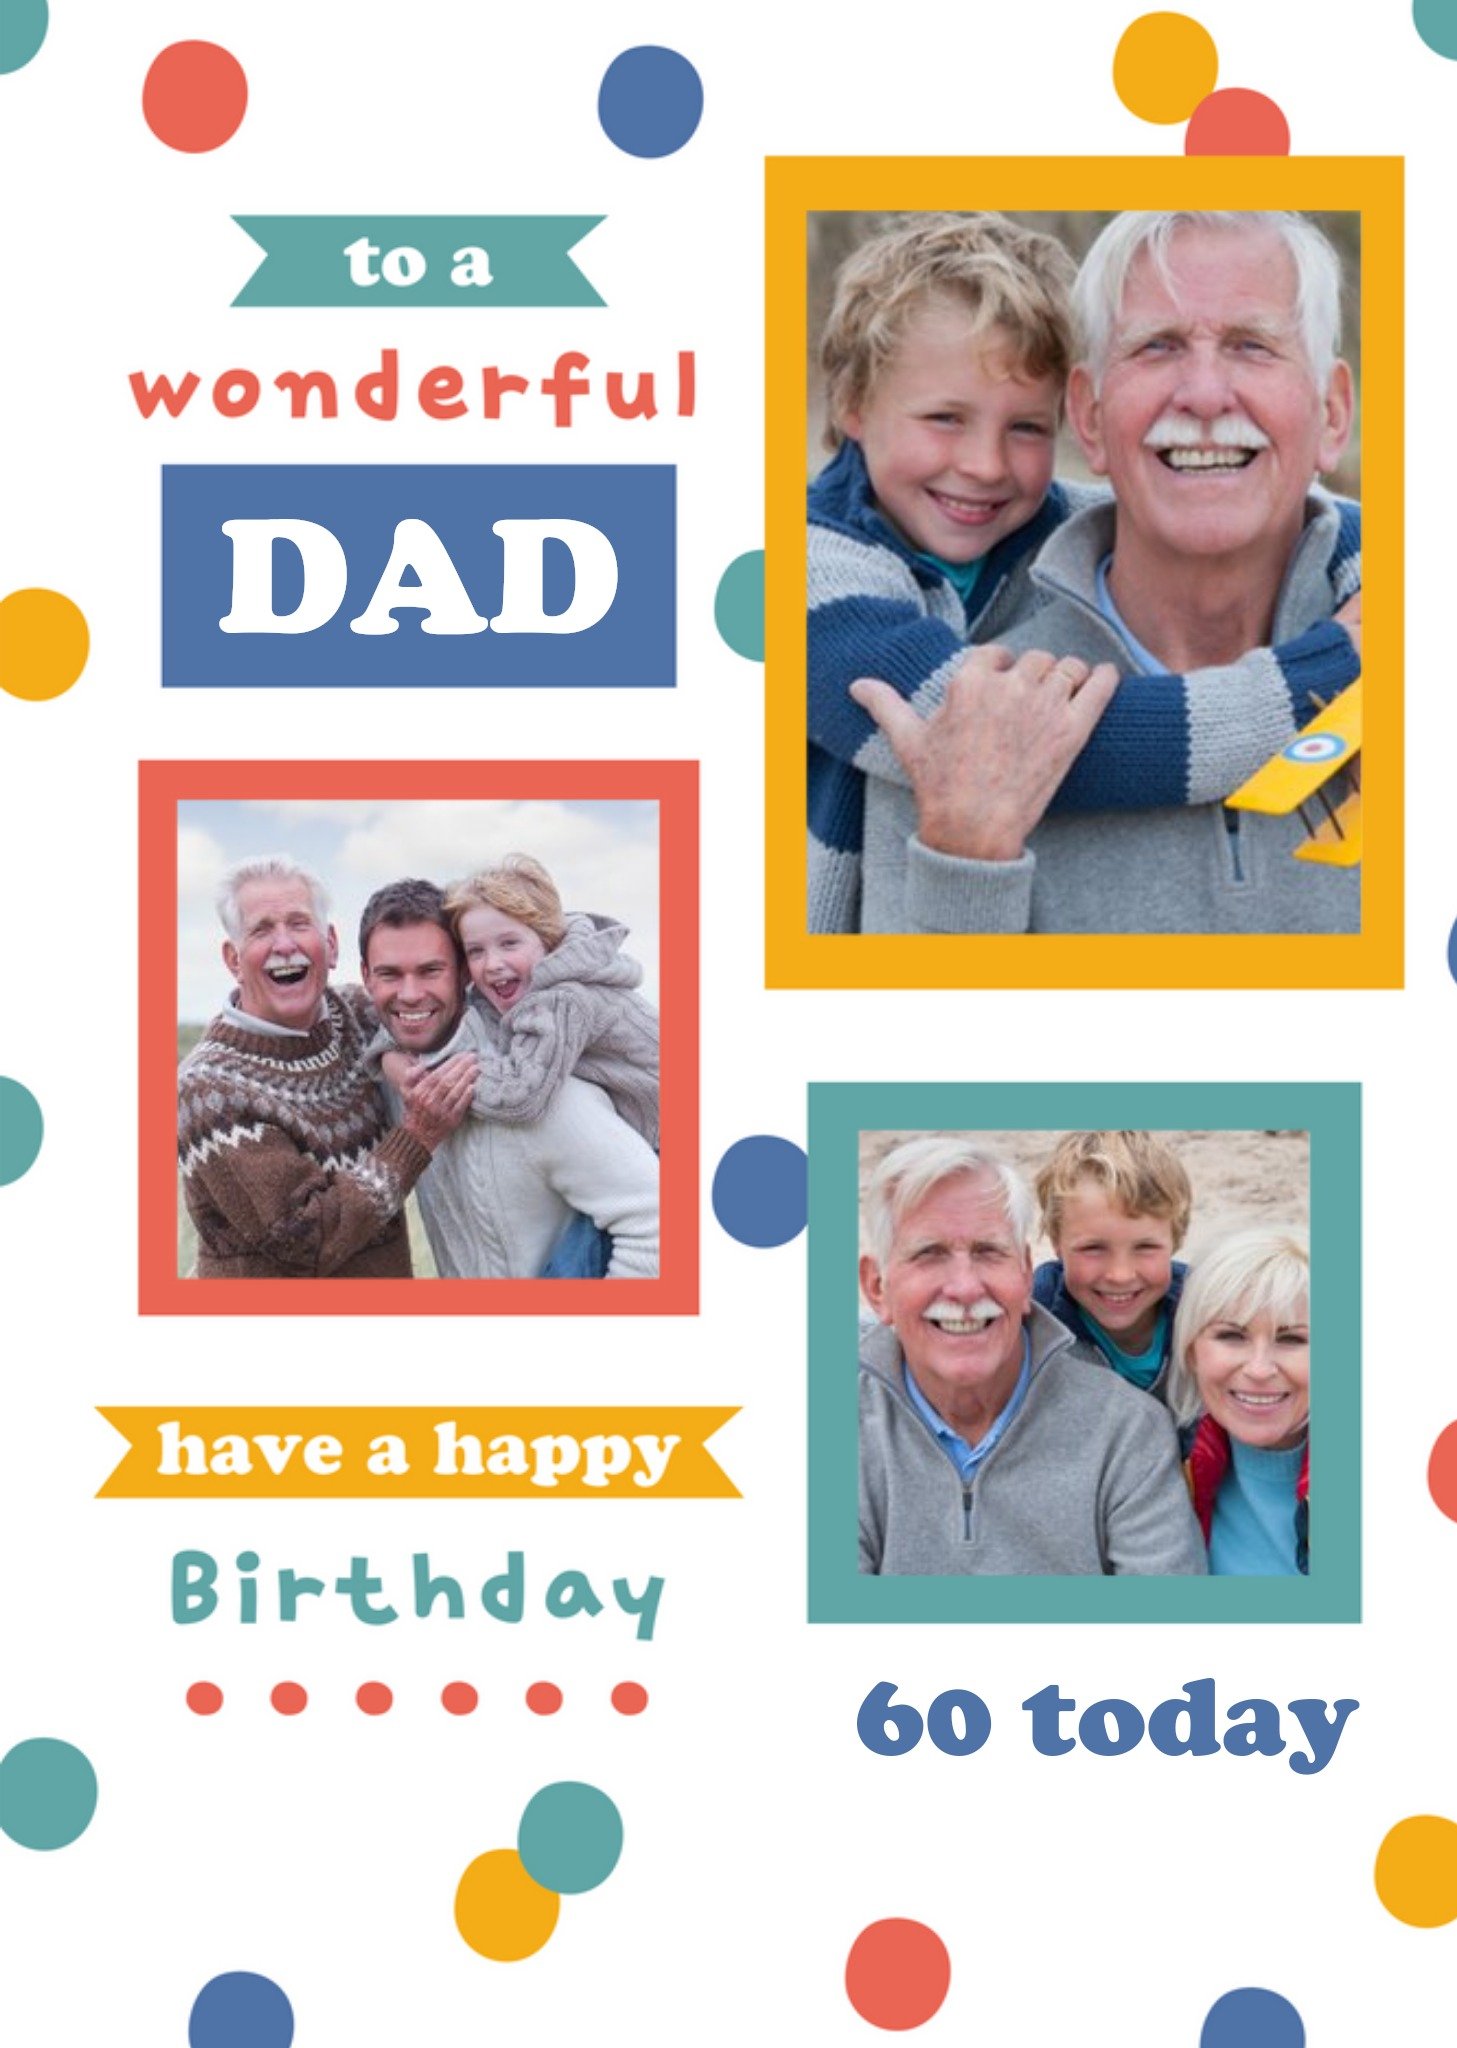 Other Polka Dot Banners Wonderful Dad 60th Birthday Photo Upload Card, Large